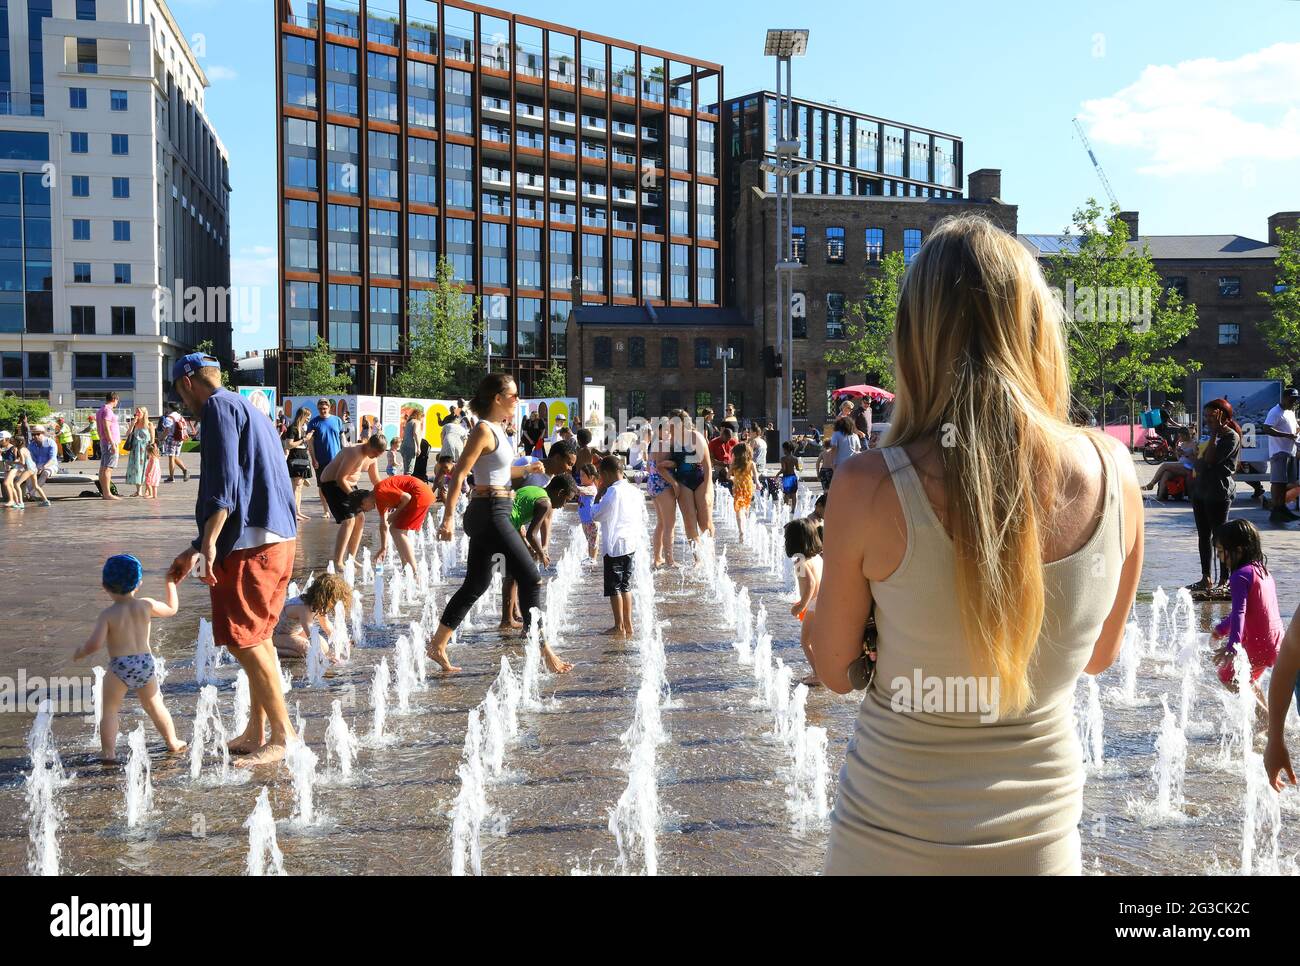 Children and families cooling down in the fountains in Granary Square at Kings Cross, on a hot June day, in London, UK Stock Photo